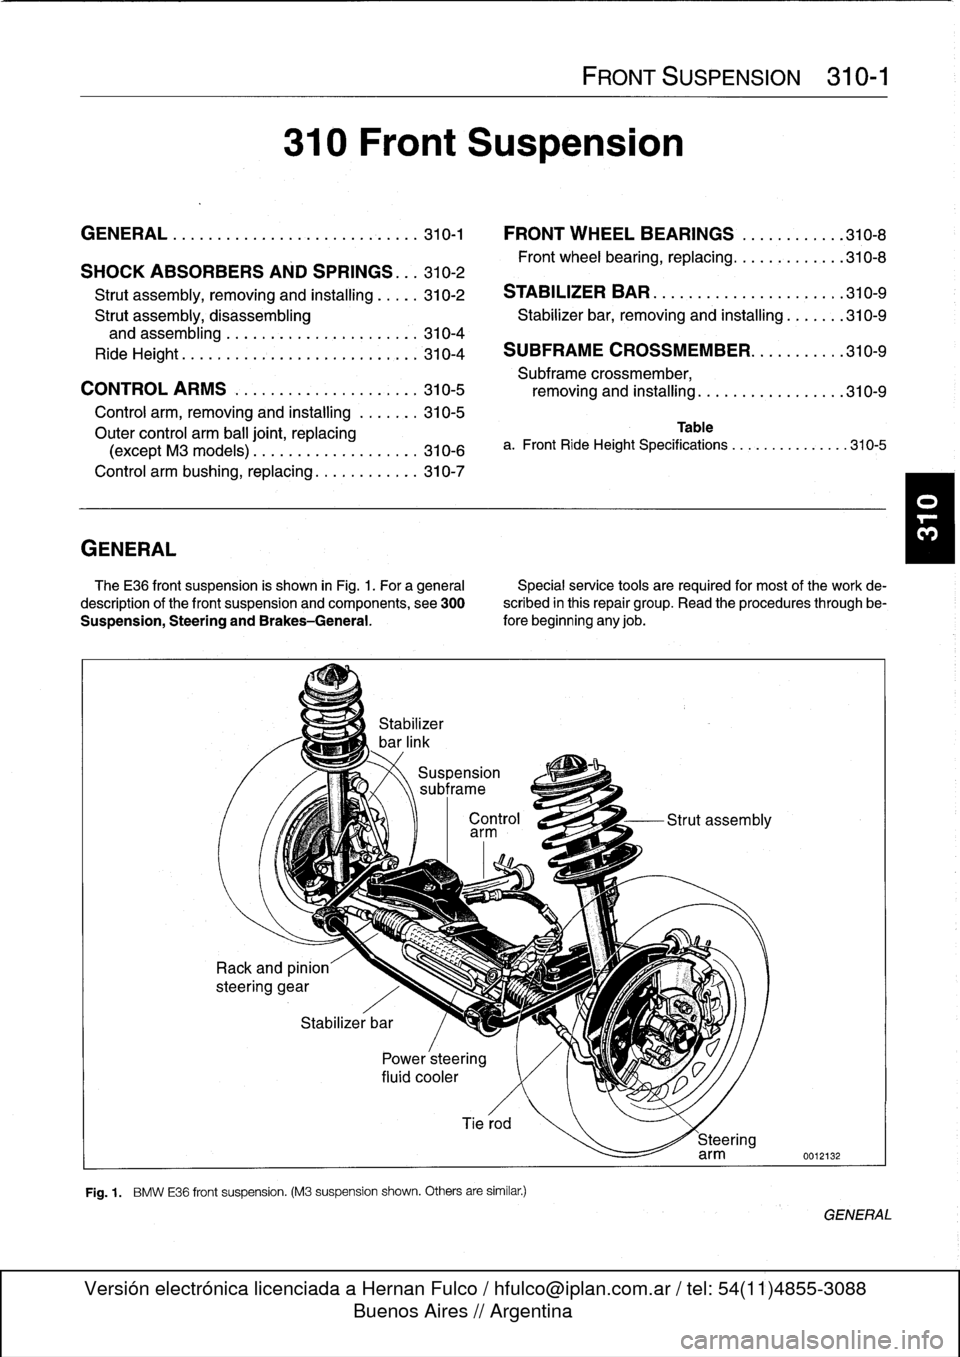 BMW 323i 1998 E36 User Guide 
GENERAL

310
Front
Suspension

GENERAL
..
.
.
.
.
.
.
.
.
.
.......
.
........
.
310-1

	

FRONT
WHEEL
BEARINGS
..
.
.
.
.......
310-8

SHOCK
ABSORBERS
AND
SPRINGS
..
.
310-2

	

Front
wheel
bearing,